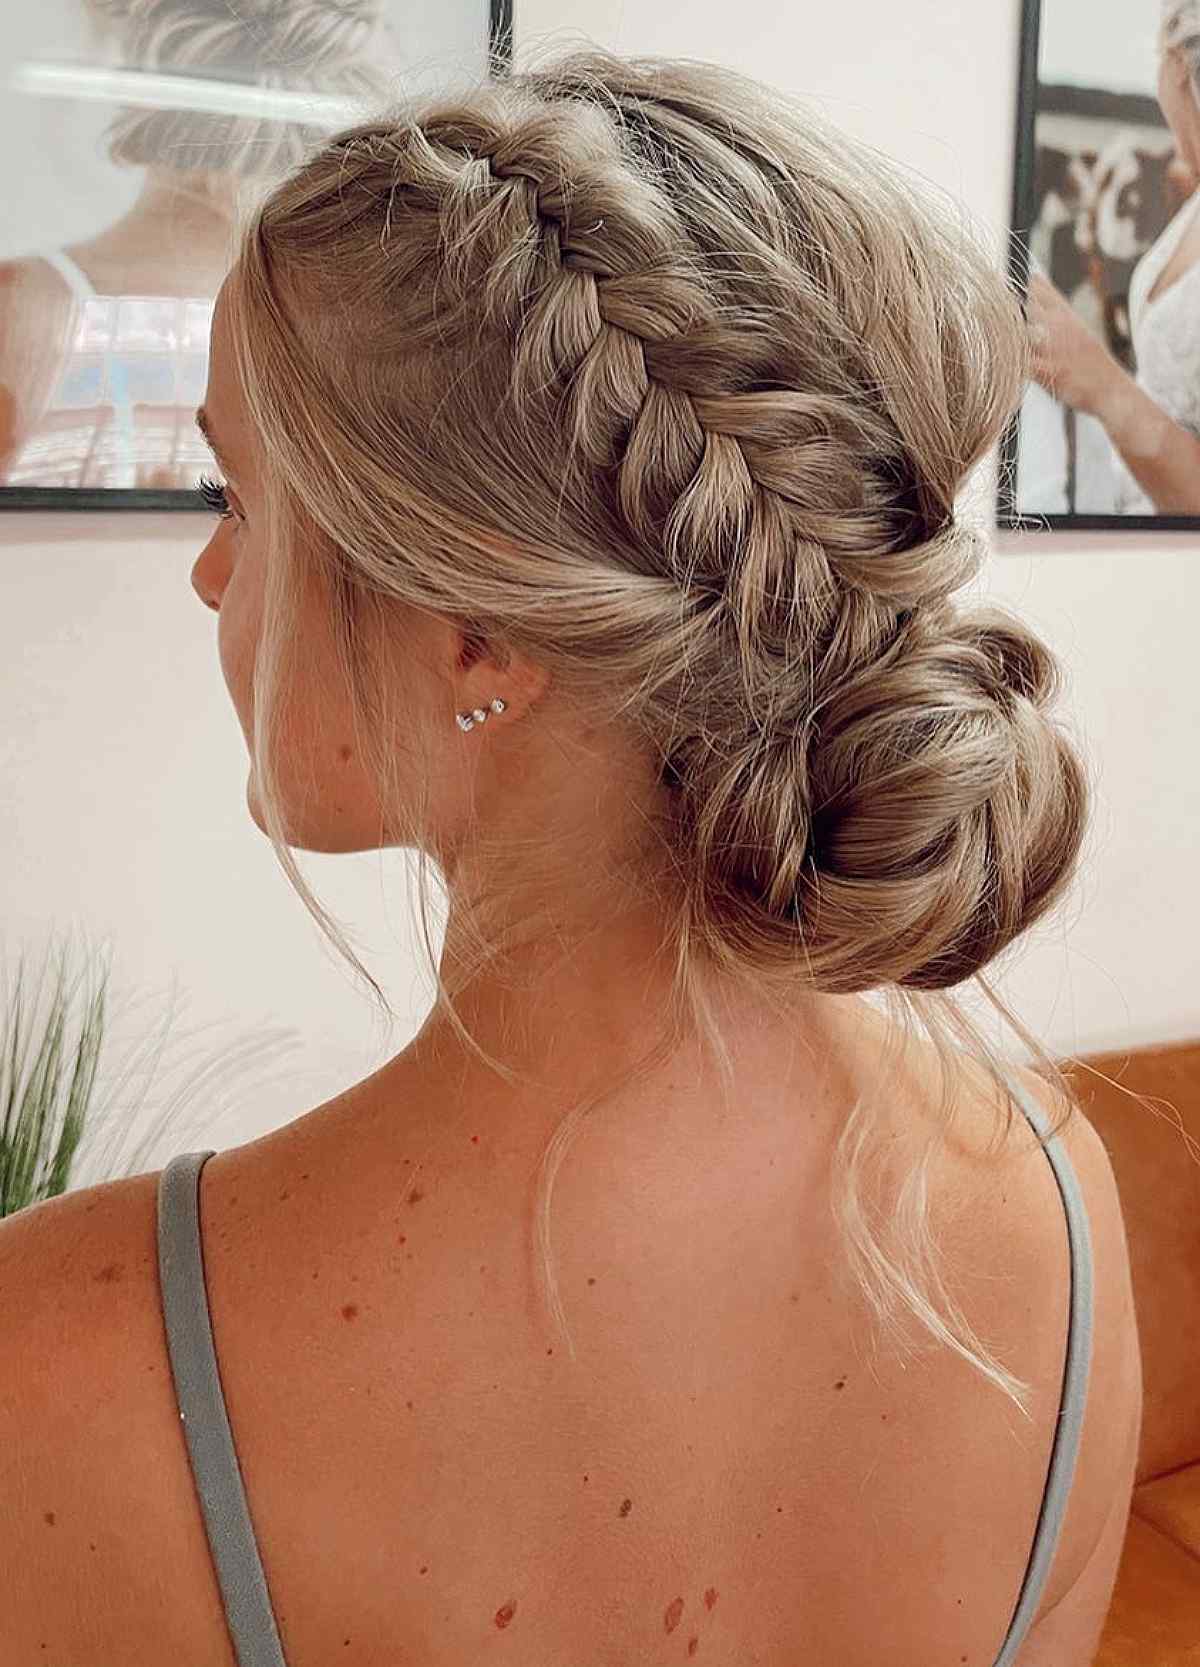 An easy braided updo hairstyle for prom